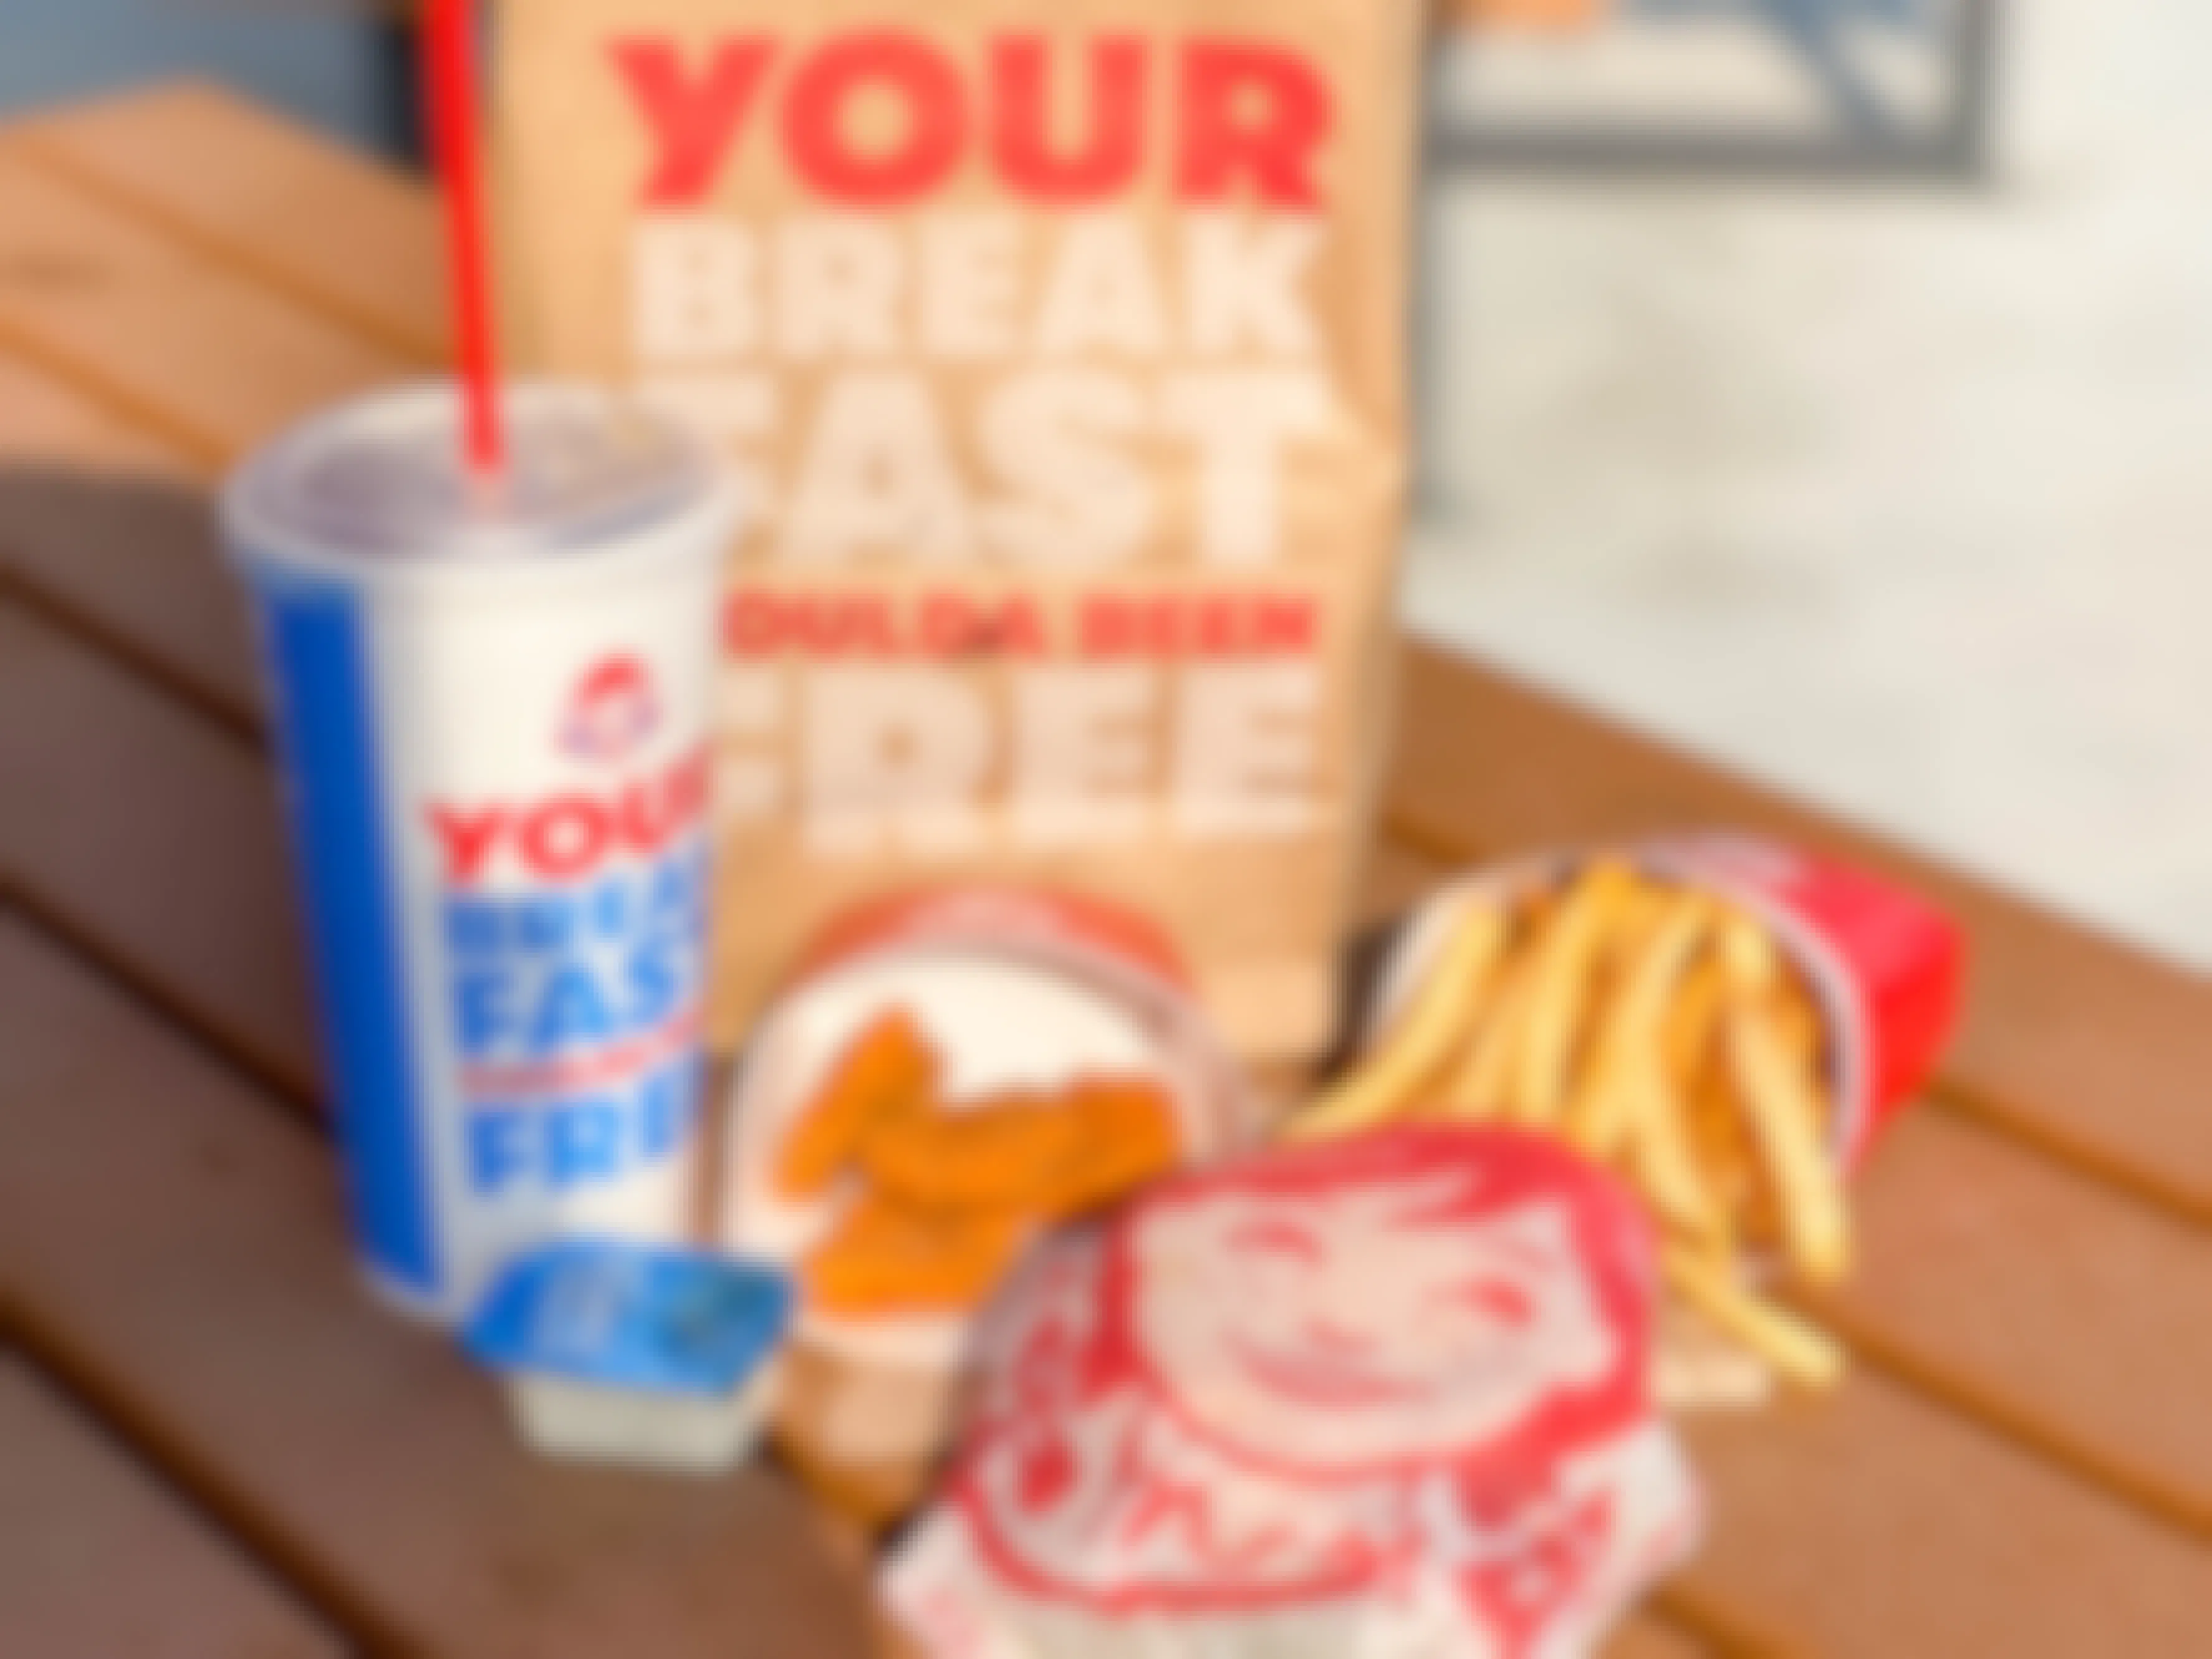 big bag deal at wendys on table 